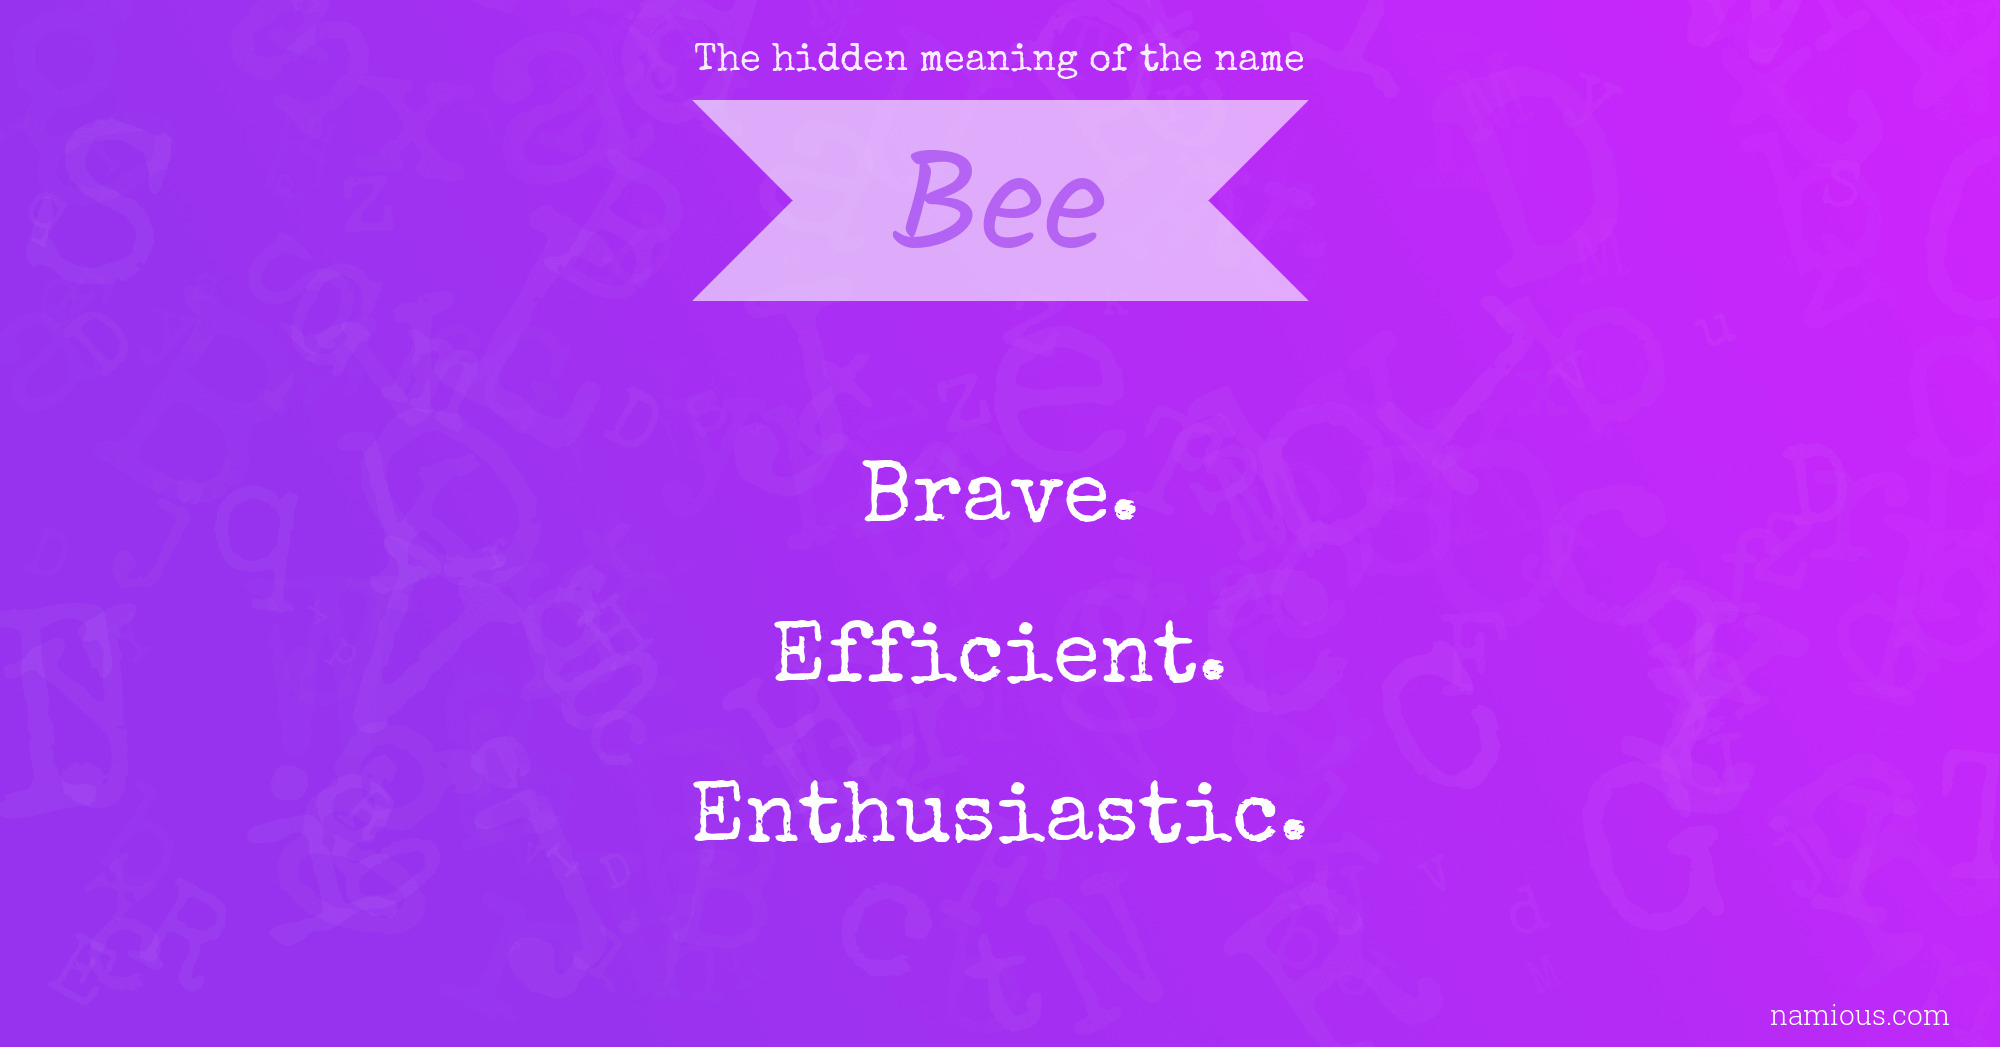 The hidden meaning of the name Bee